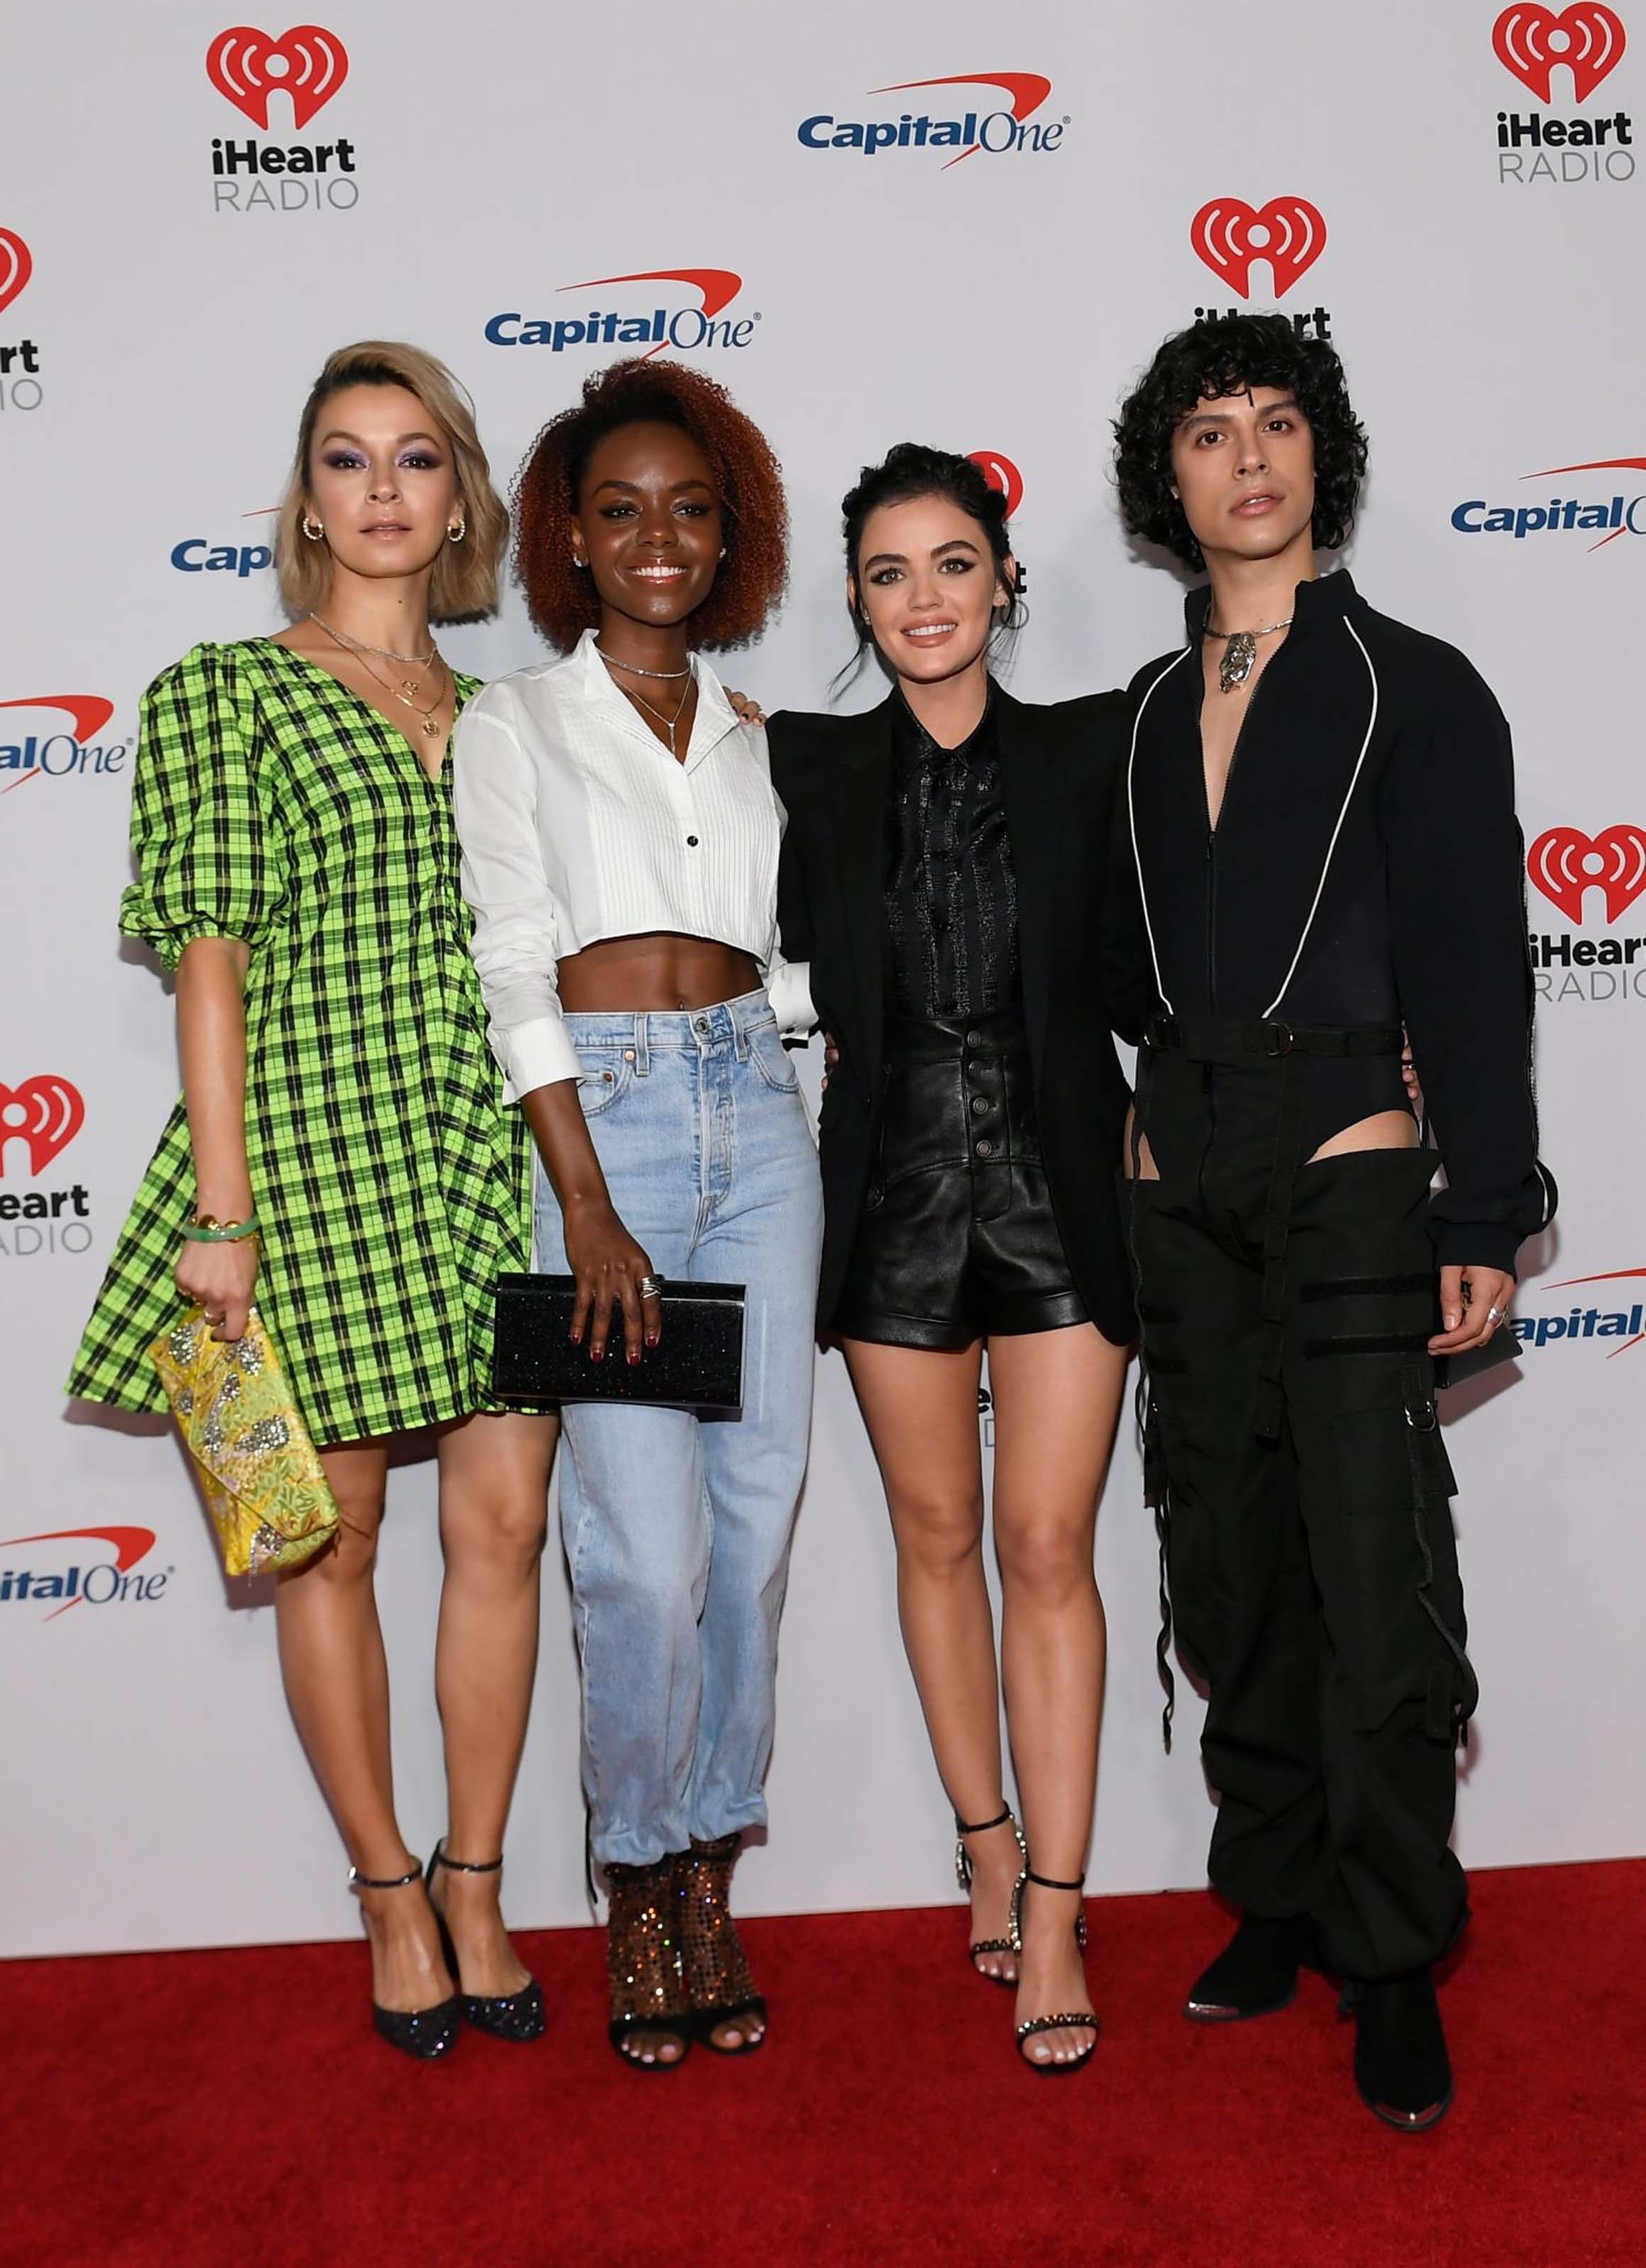 Lucy Hale attends iHeartRadio Music Festival